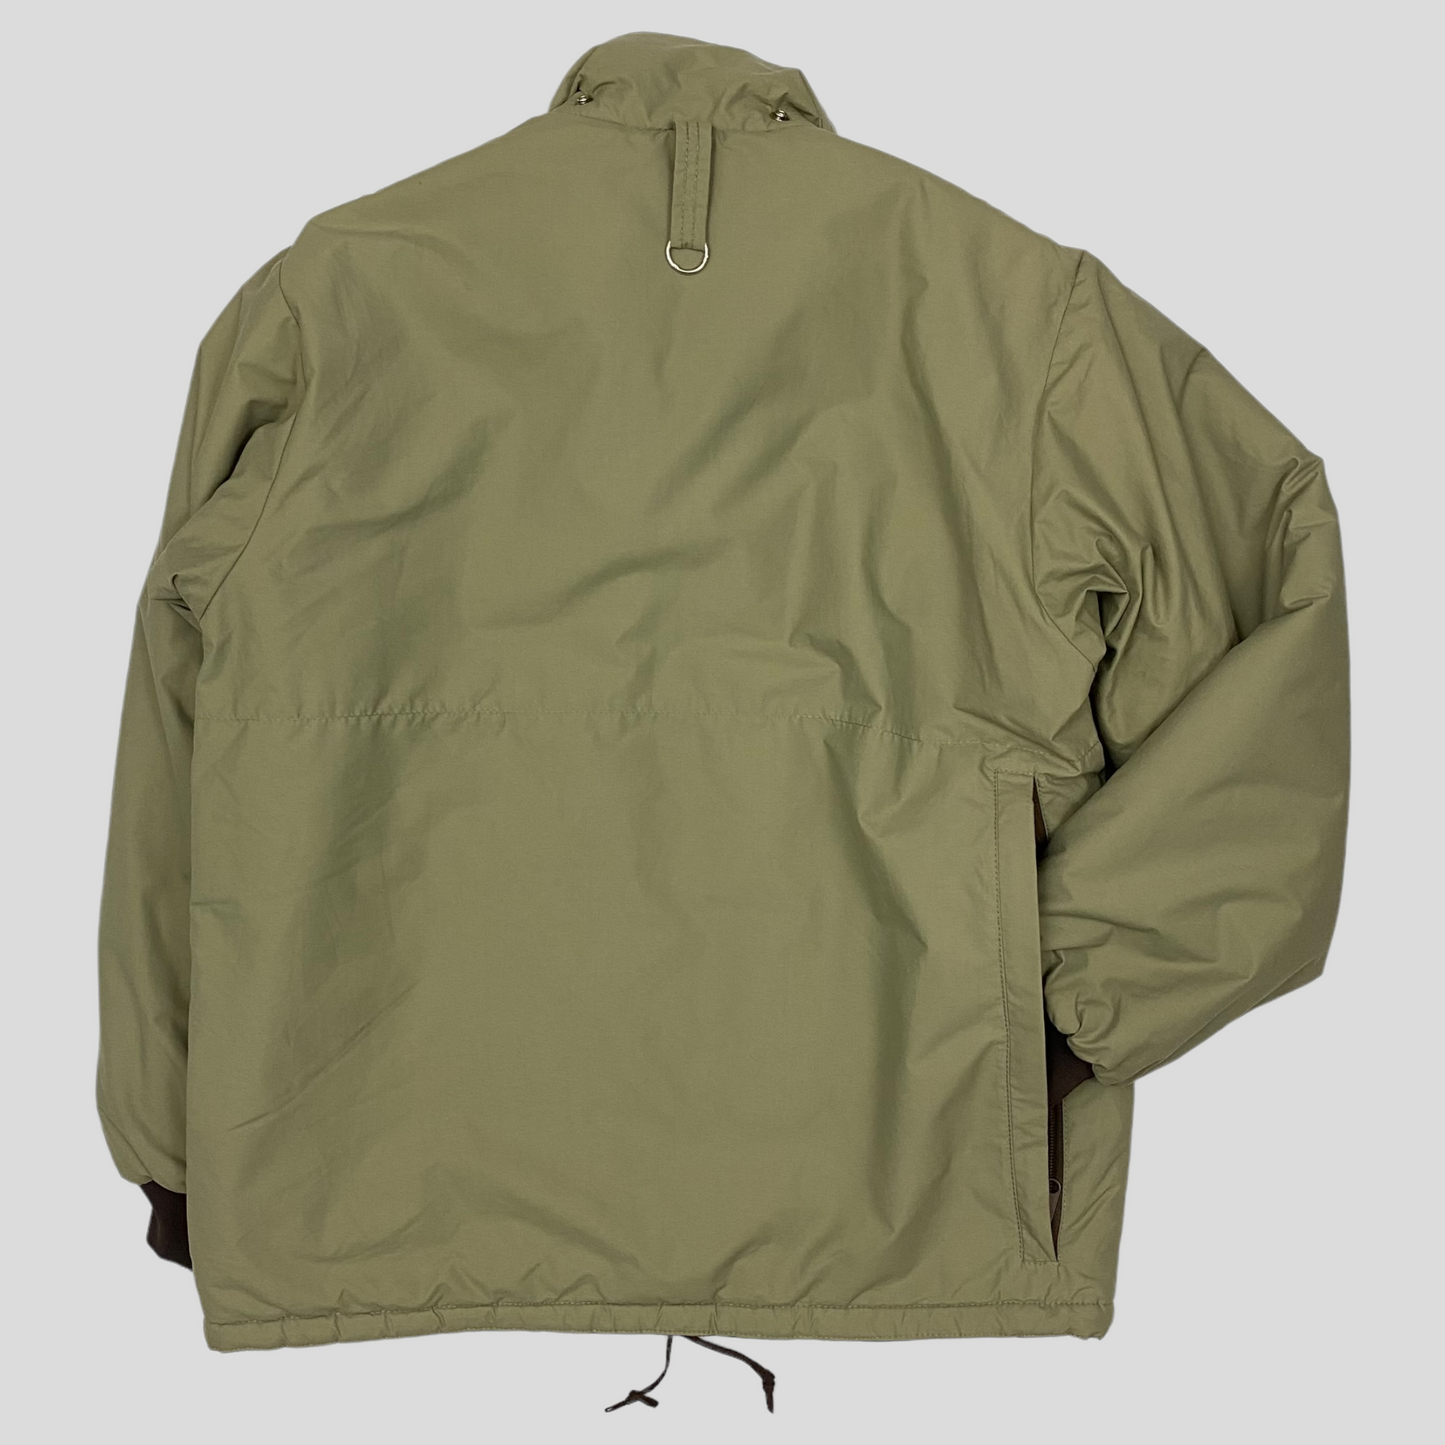 Mont-bell 90’s Tactical Reversible Fisherman’s Puffer Jacket - M